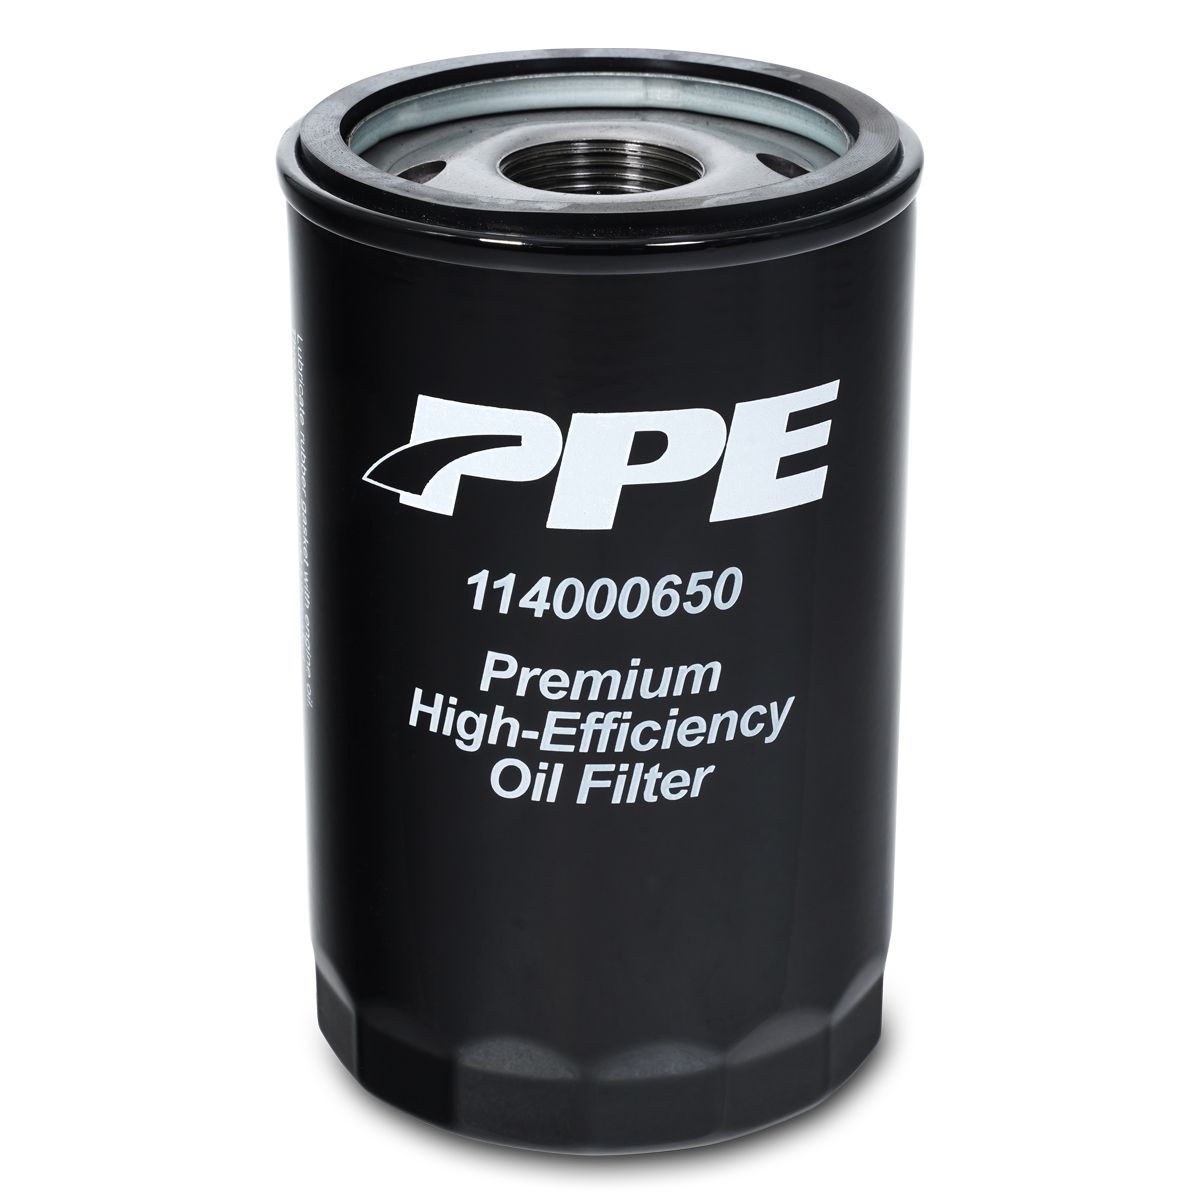 PPE Premium High-Efficiency Oil Filter For 19-21 GM 1500 3.0L